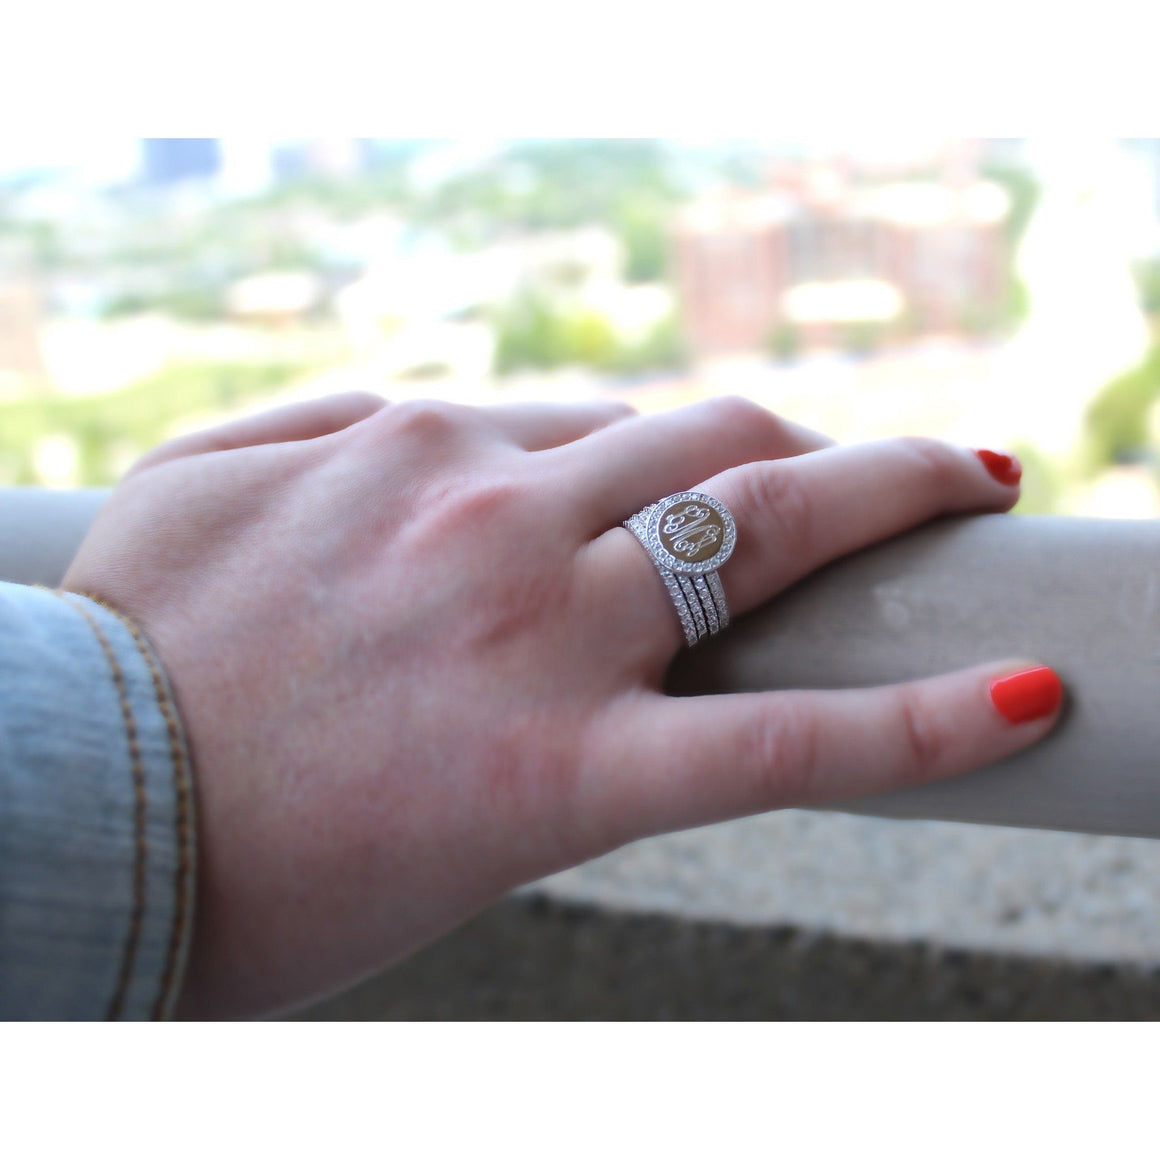 Monogram Stacking Rings with Cubic Zirconia in Sterling Silver